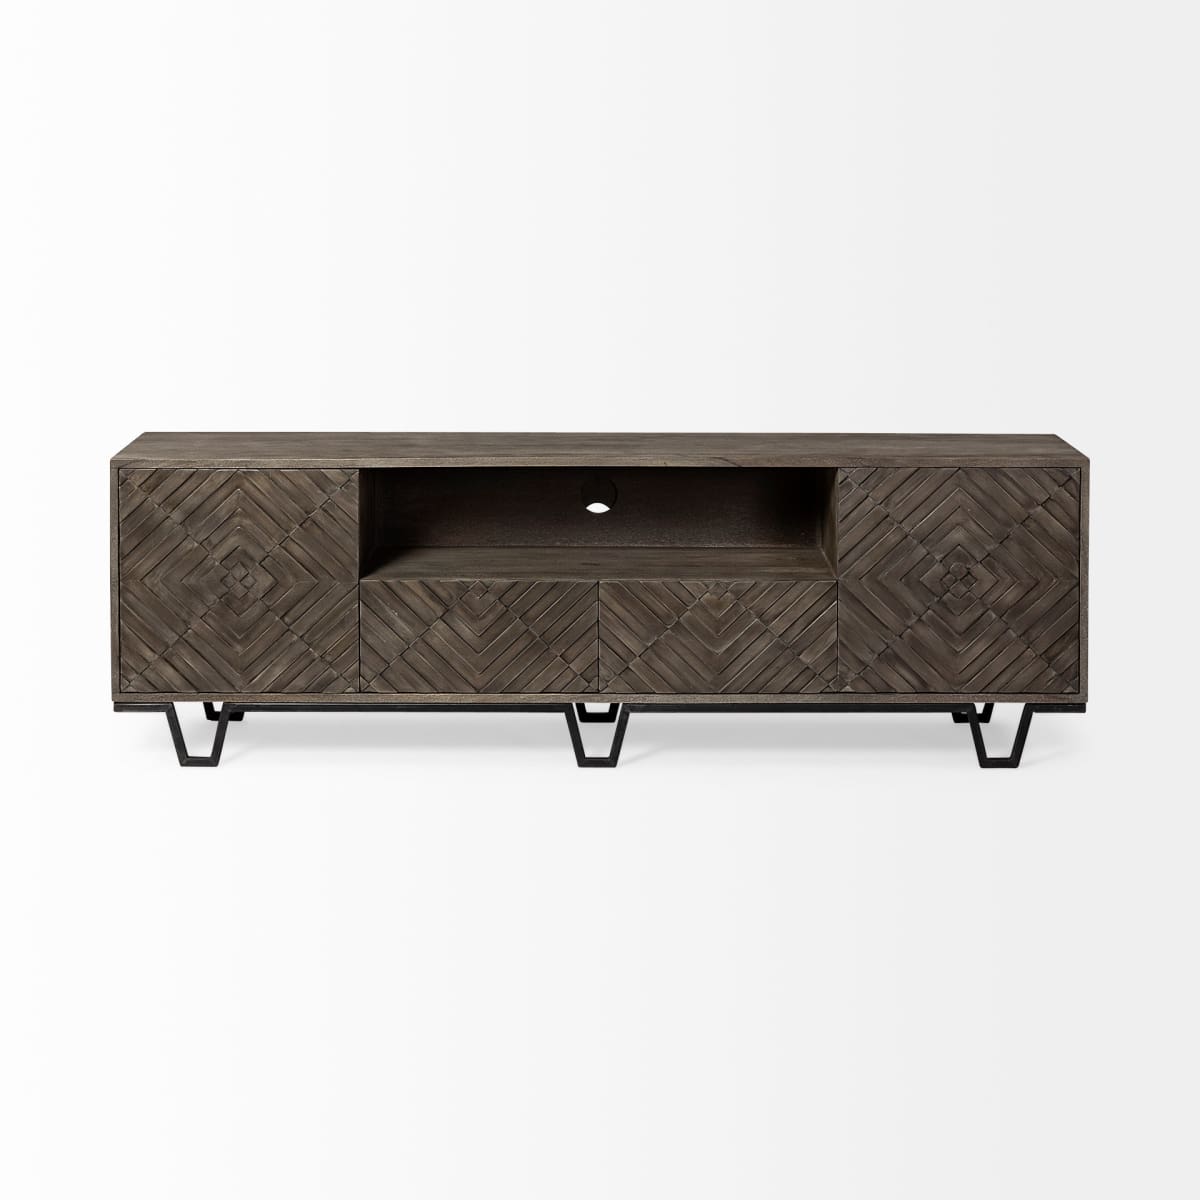 Argyle Media Console Brown Wood - media-console